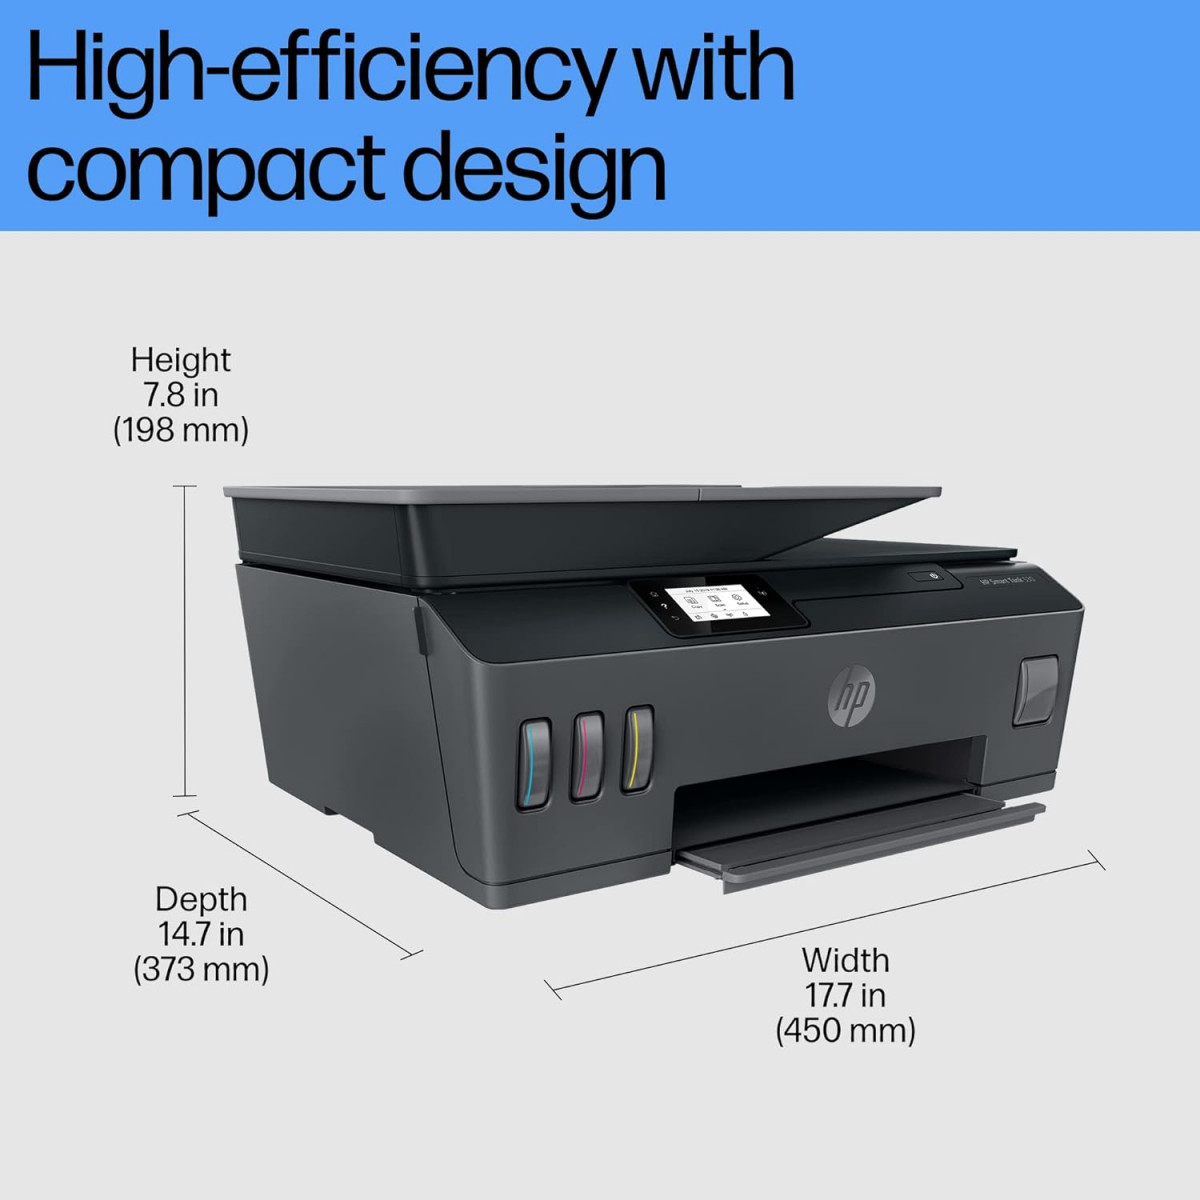 HP Smart Tank 530 All-in-one WiFi Colour Printer with ADF (Upto 18000 Black and 8000 Colour Pages Included in The Box)